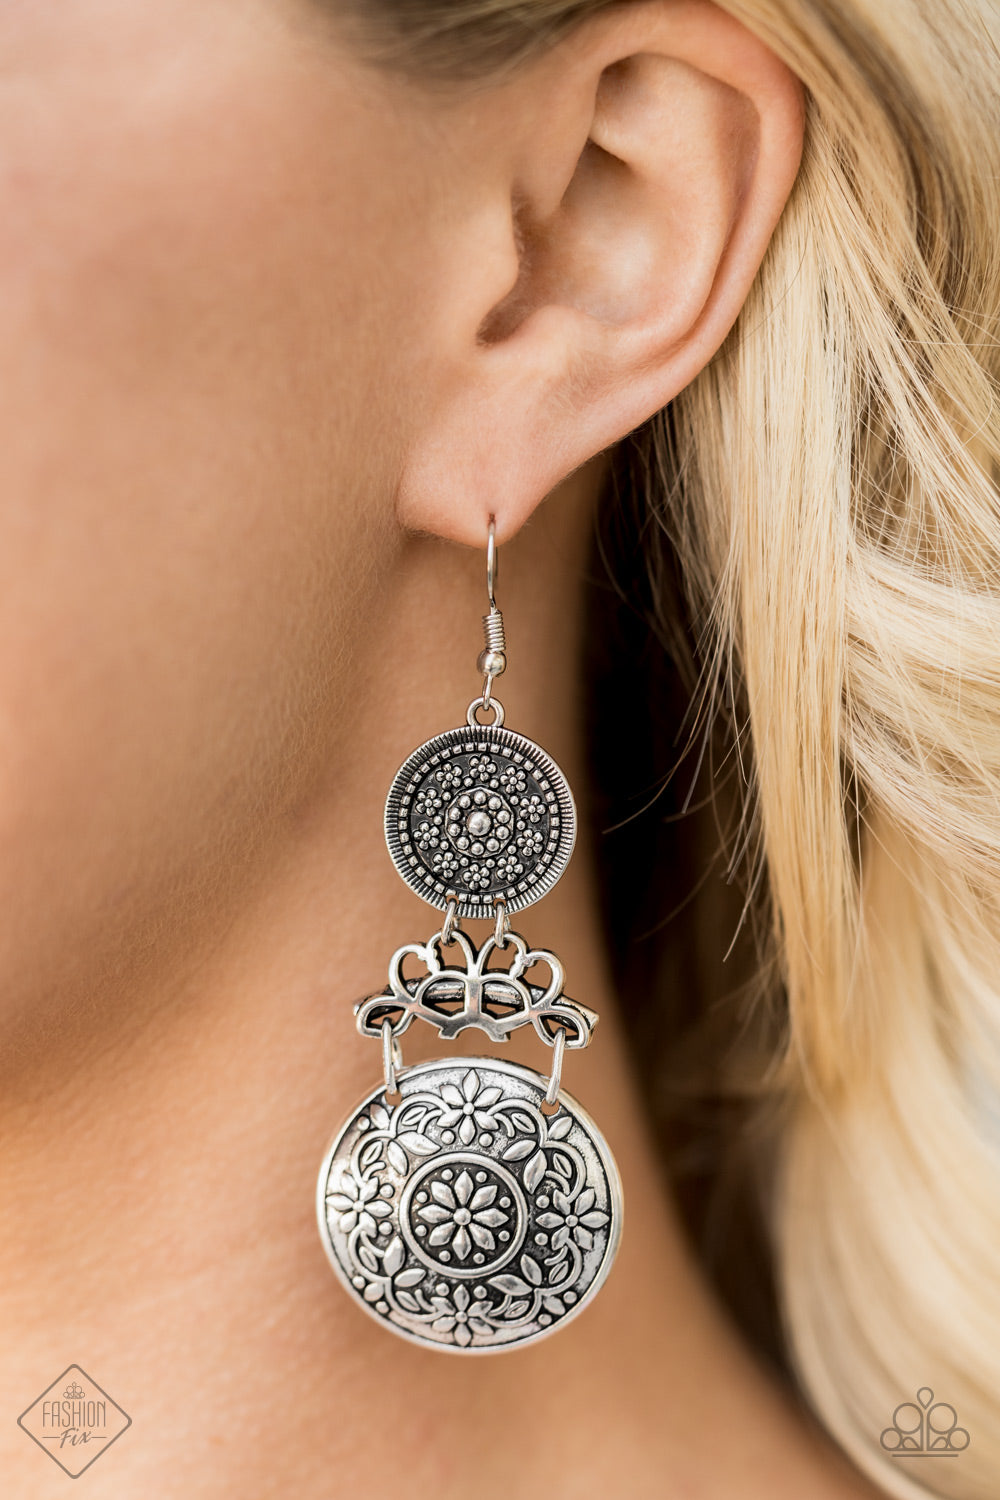 GARDEN ADVENTURE - SILVER FLORAL DISCS HINGED FASHION FIX EARRINGS